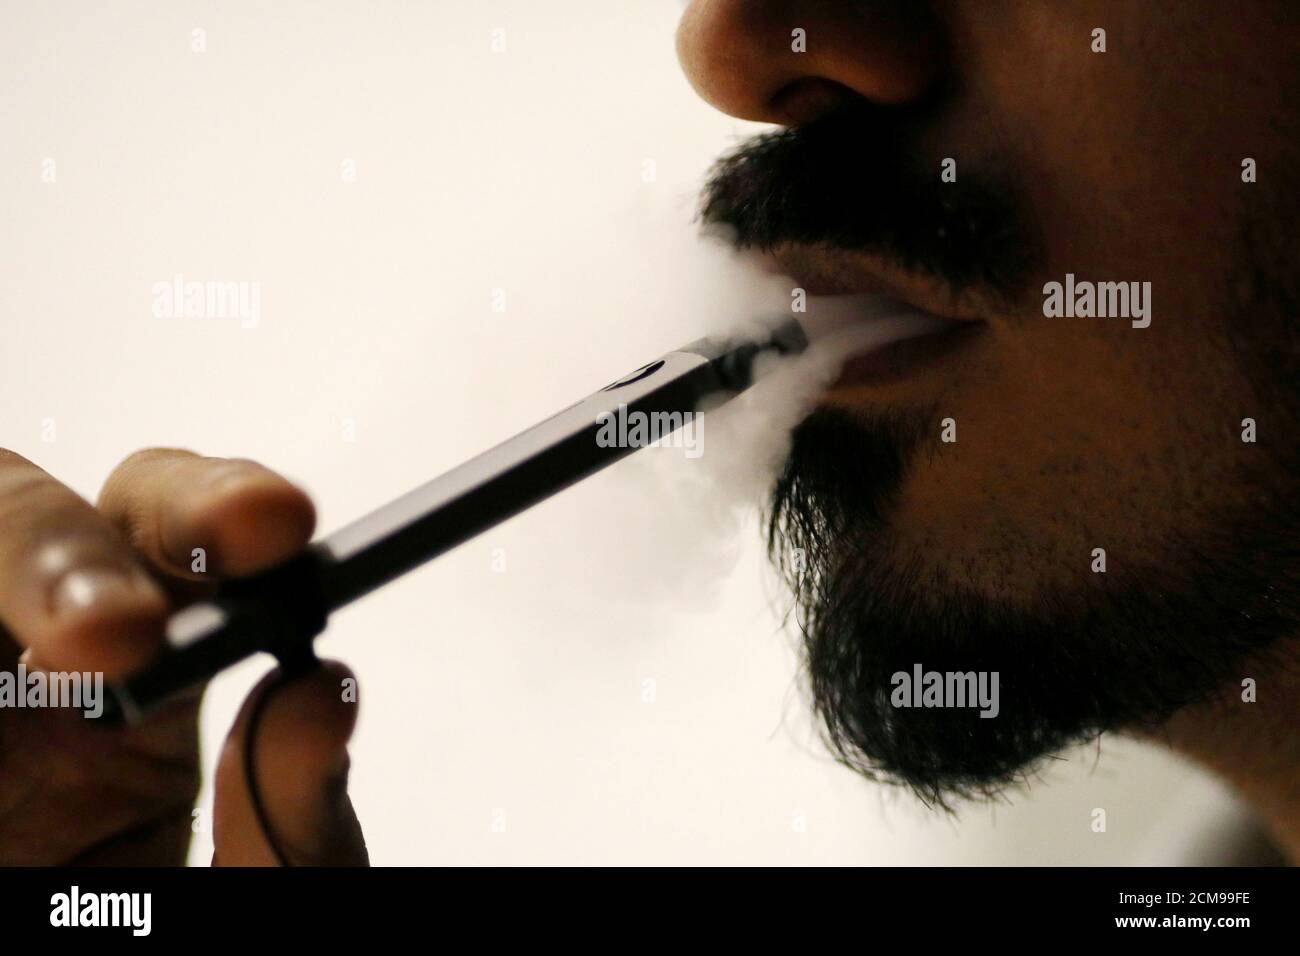 Ali Mansoor, an Emirati vape enthusiast, poses while smoking an e-cigarette  at a cafe in Dubai, United Arab Emirates August 22, 2019. Picture taken  August 22, 2019. REUTERS/Christopher Pike Stock Photo - Alamy